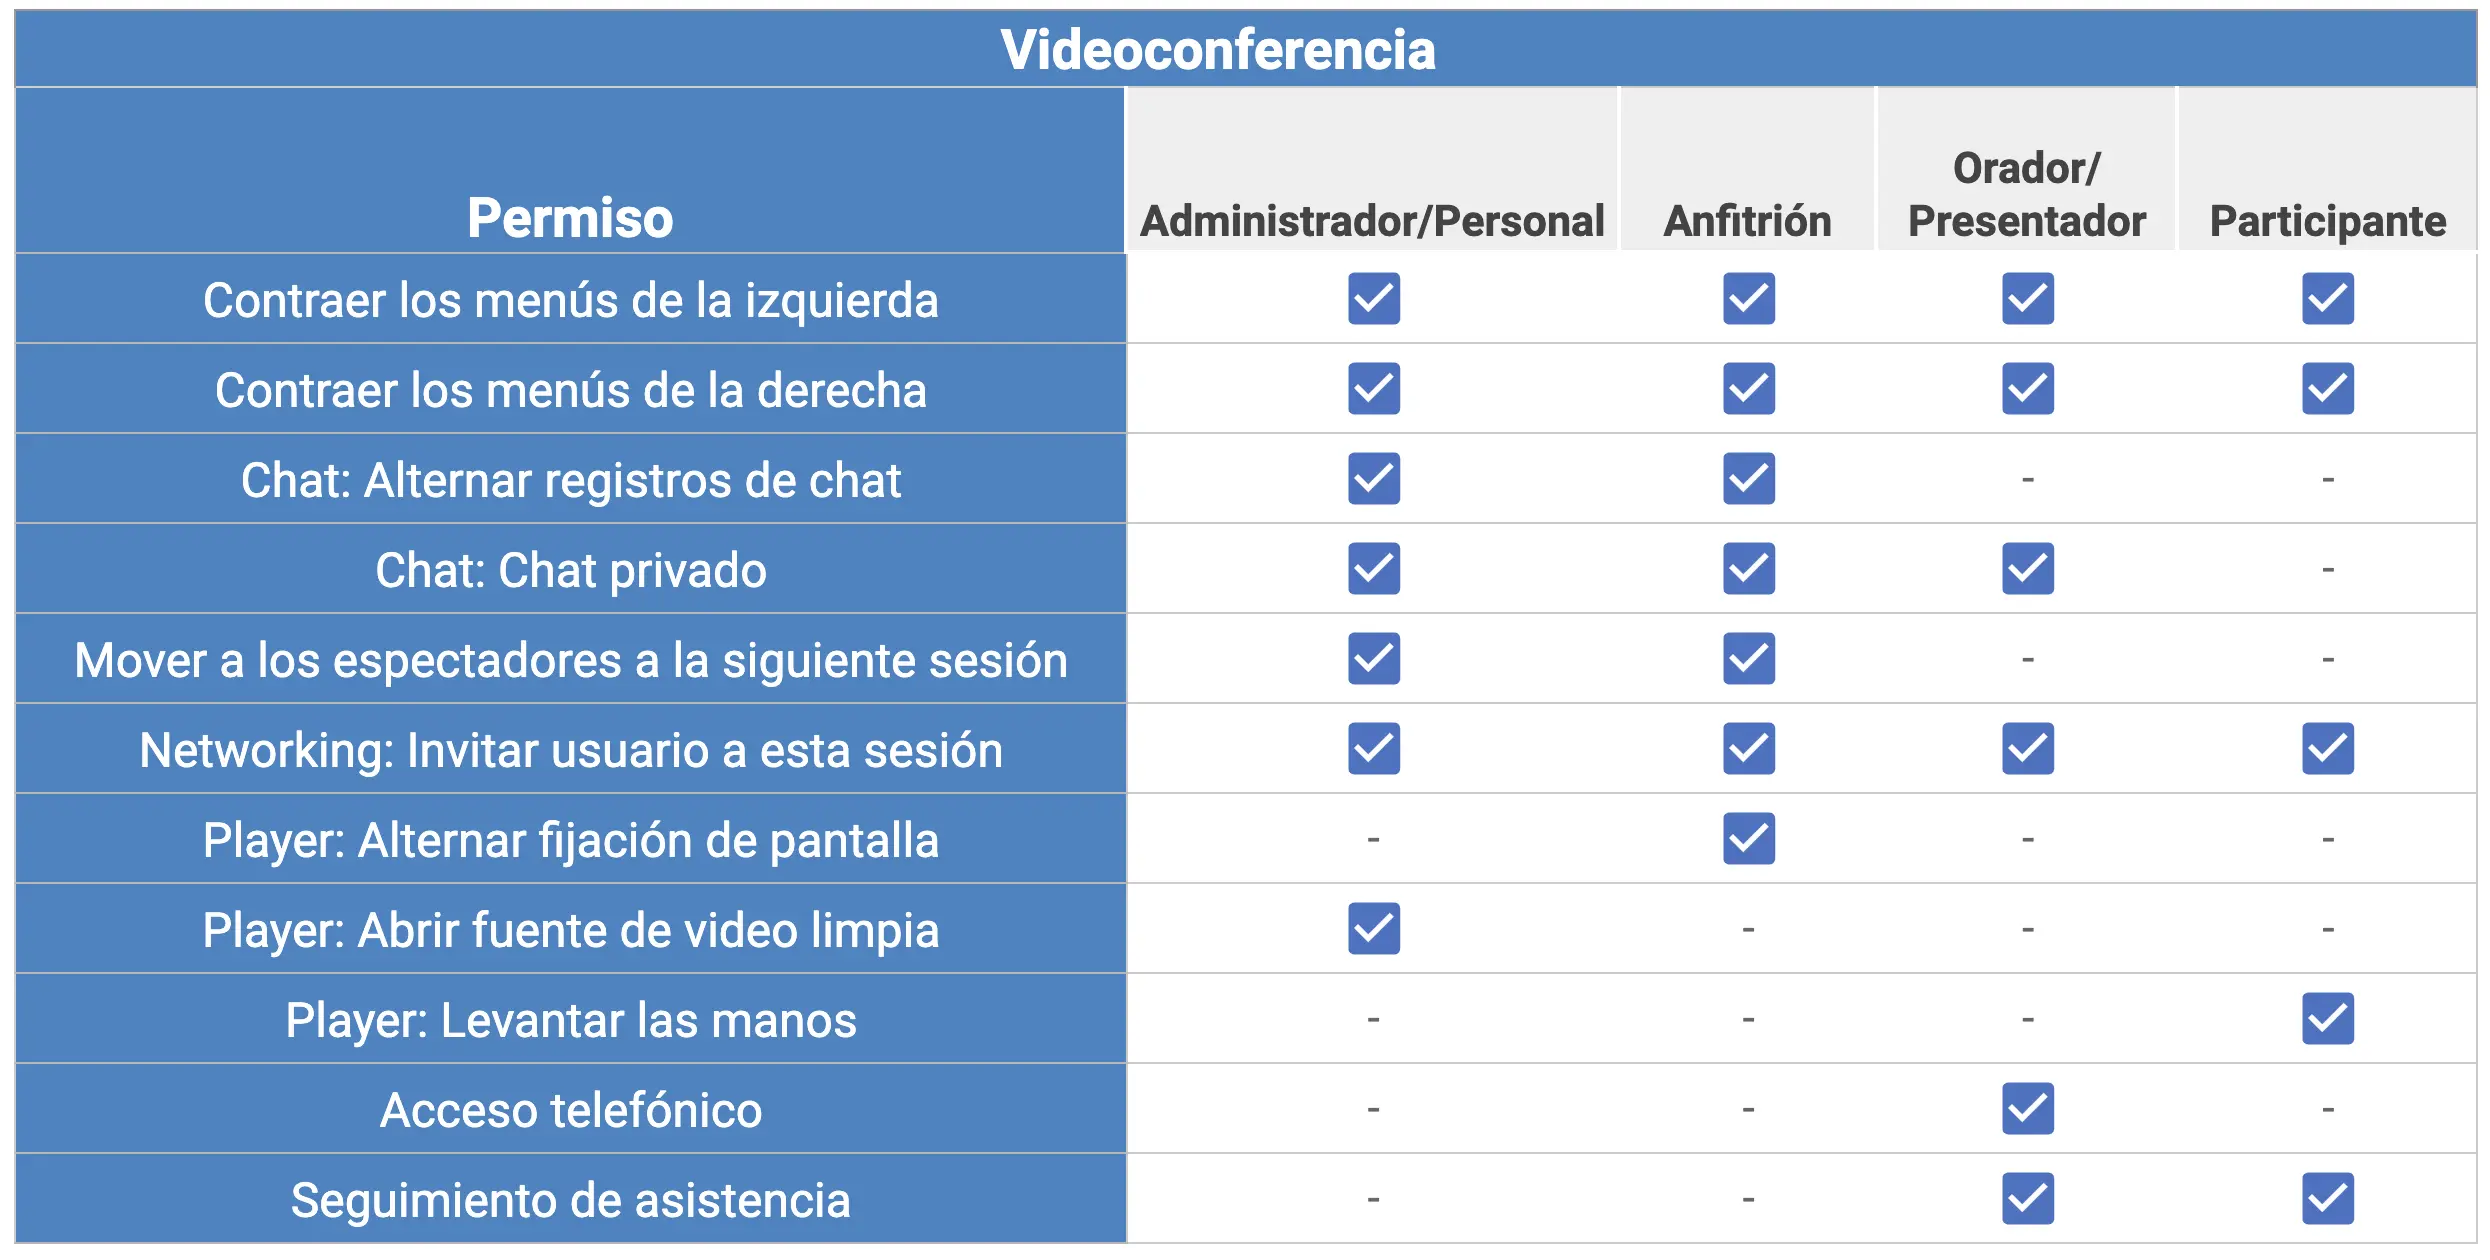 Table showing what each permission level can do in Video Conferencing